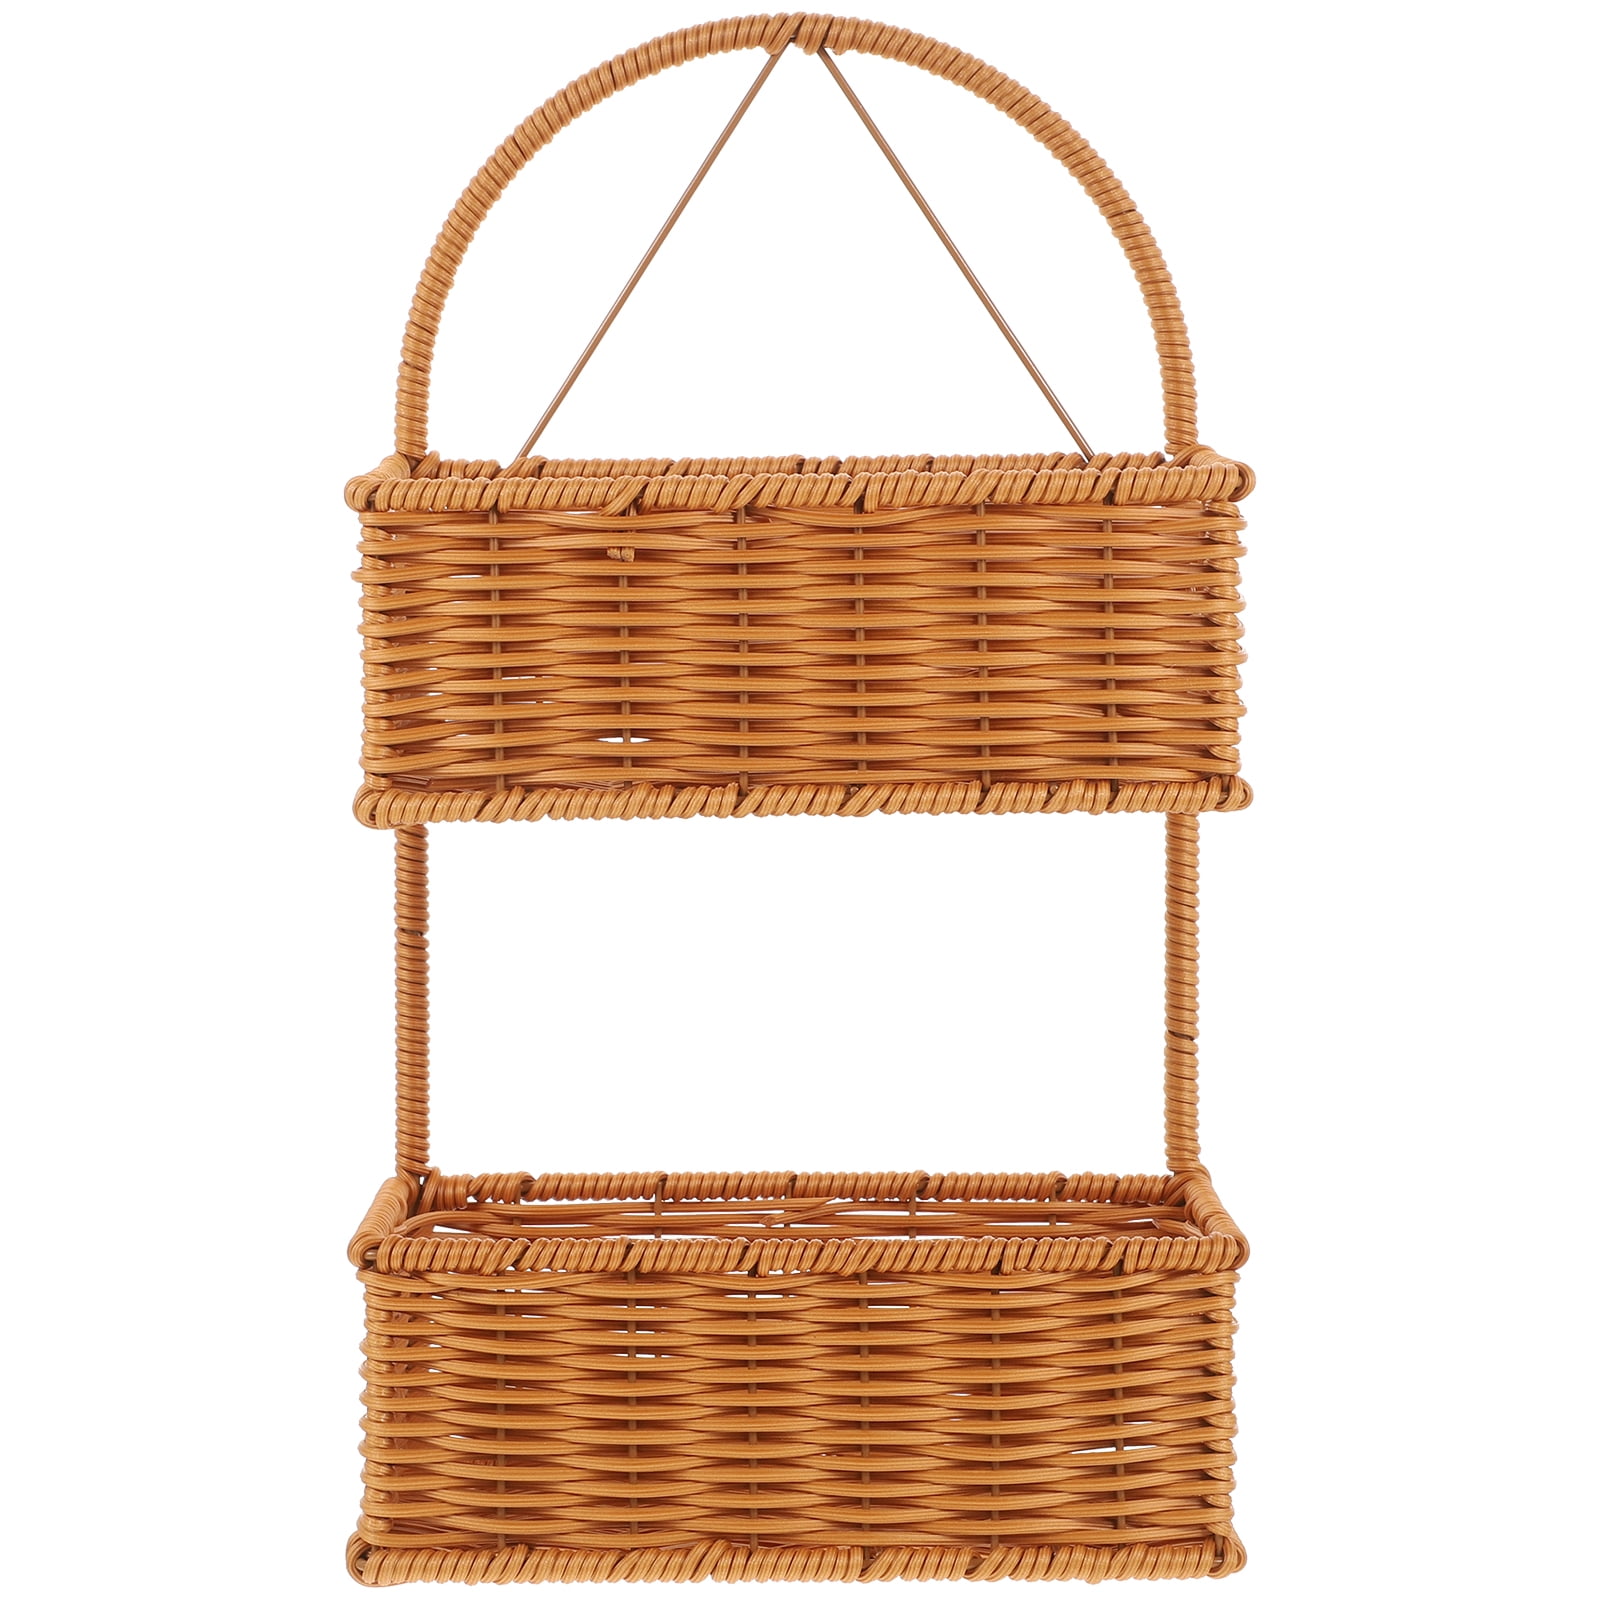 2 Bundles Basket Making Supplies Wedding Ceremony Decorations Bamboo  Material Flat Coil Basket Reeds Strip Strips For Weaving - AliExpress